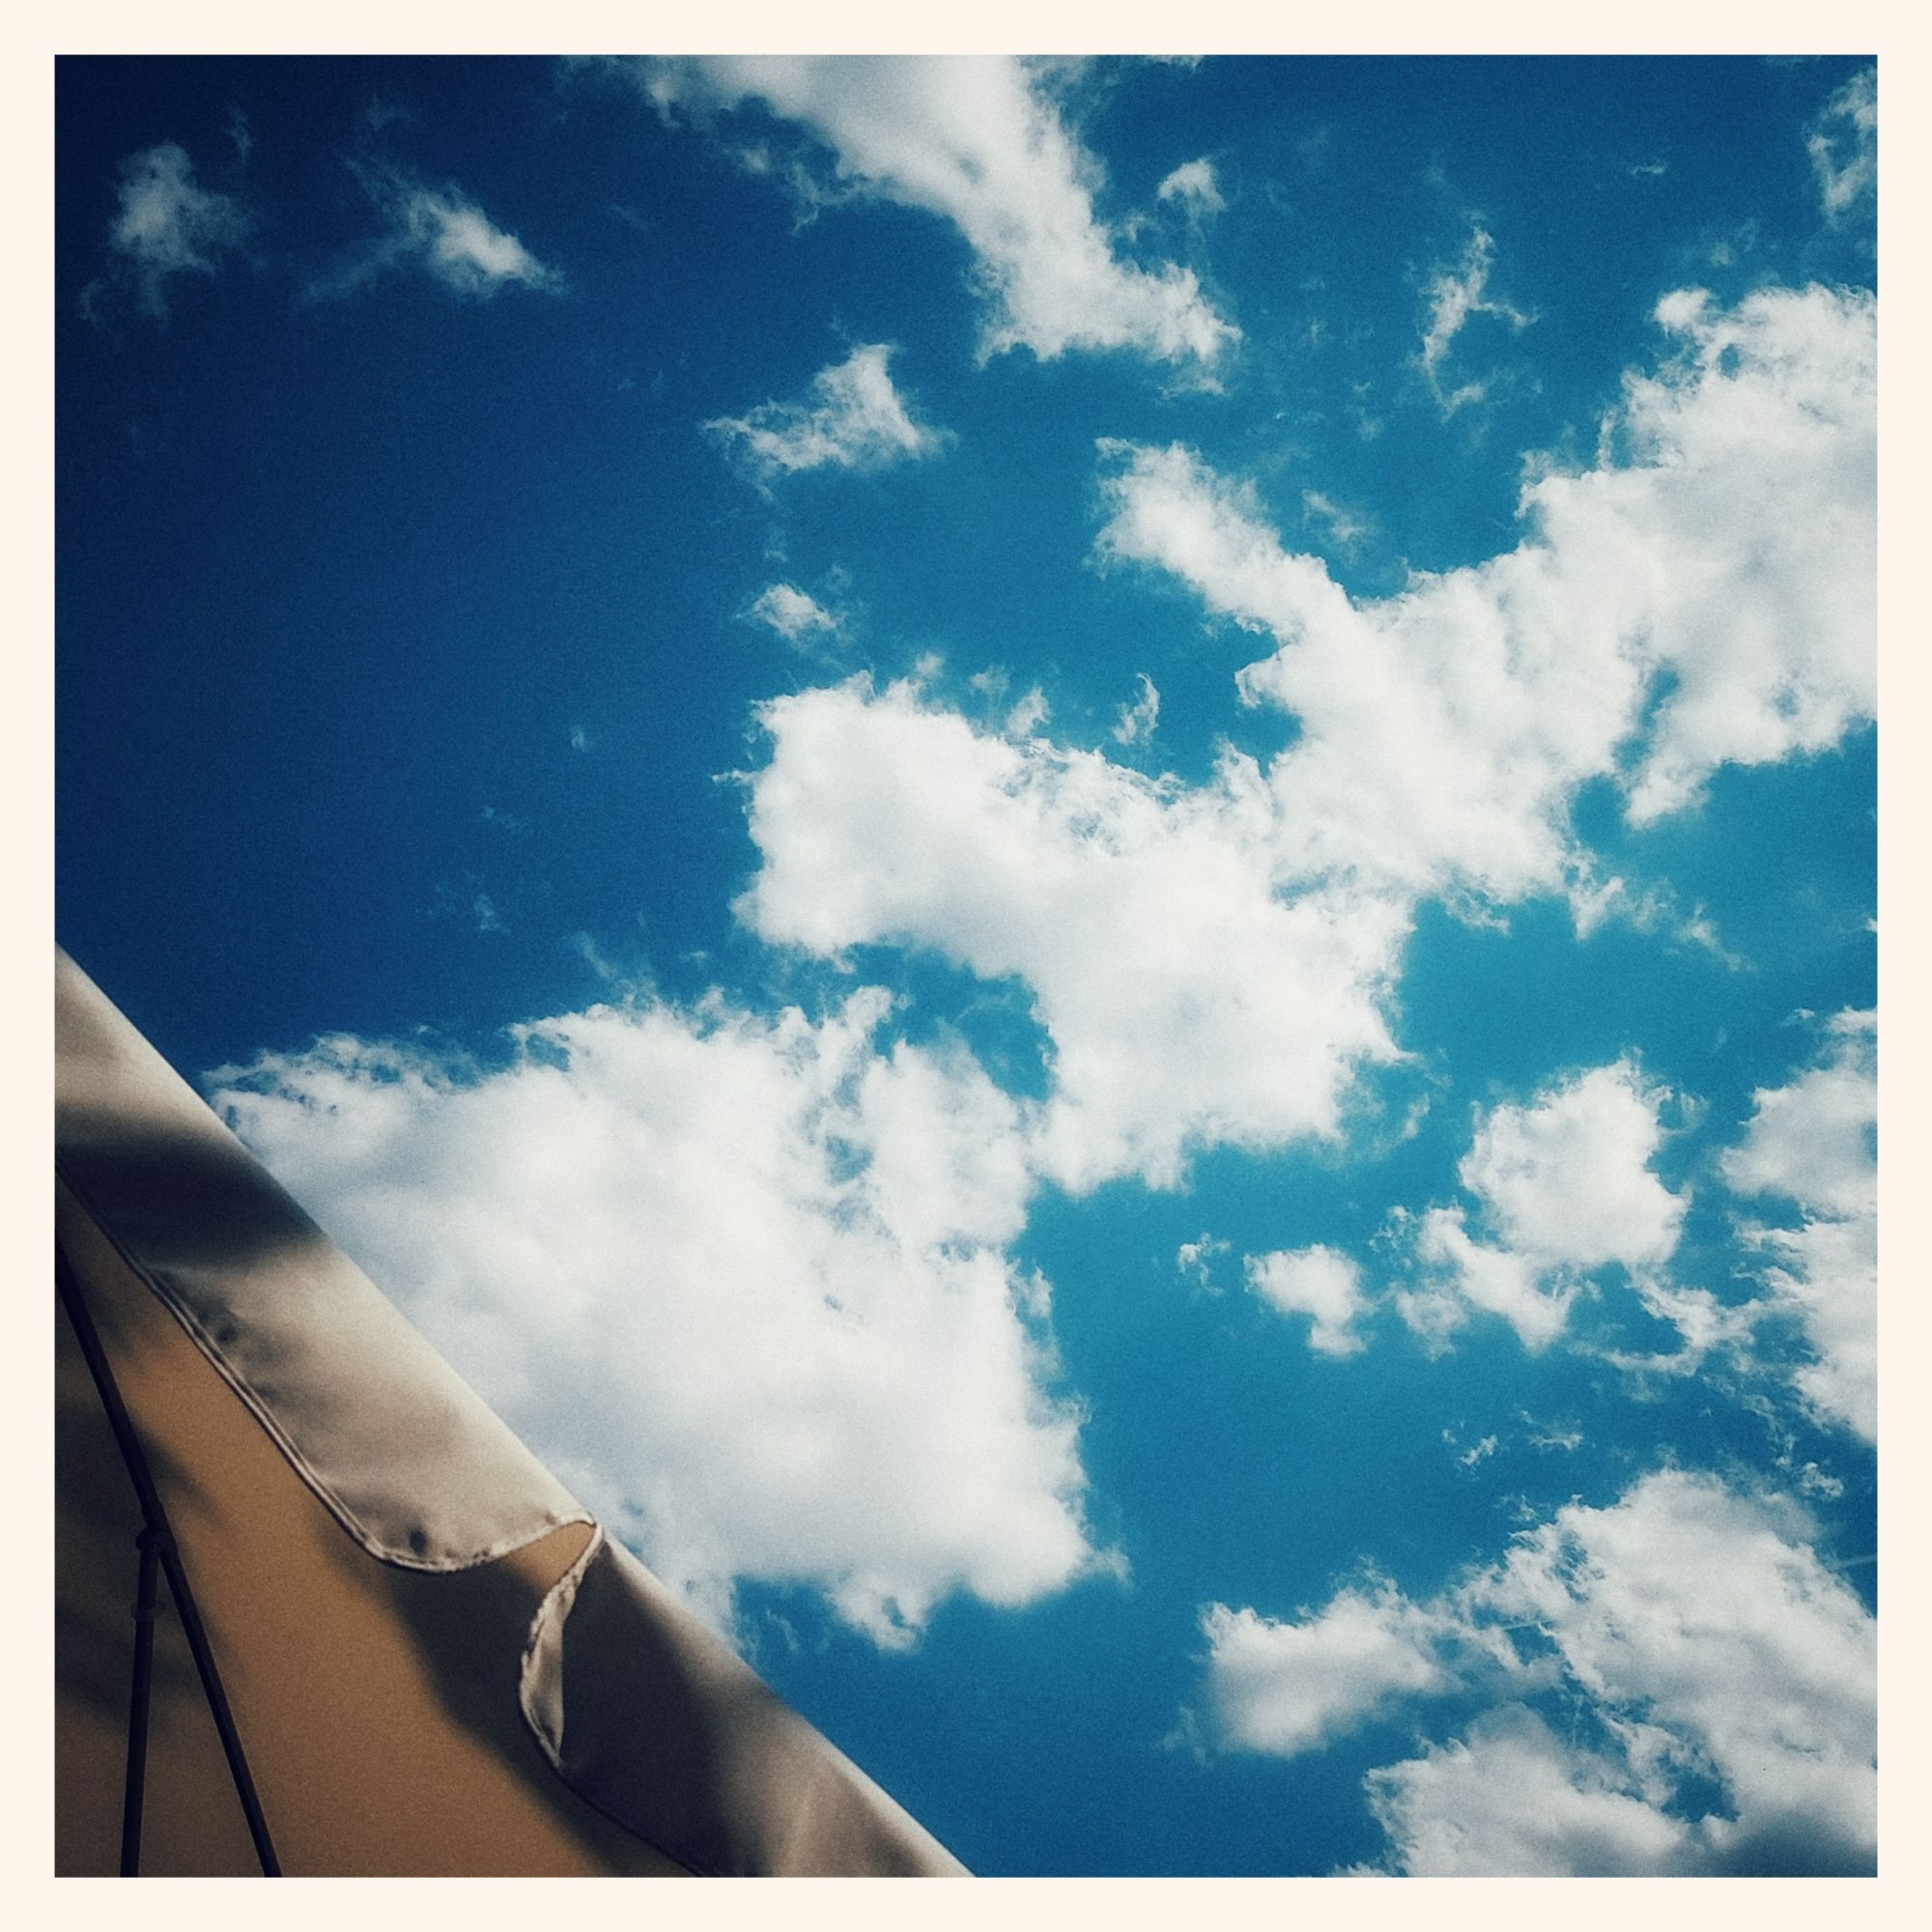 High contrast sky, white clouds on a deep blue backdrop. Part of an umbrella on the lower left.